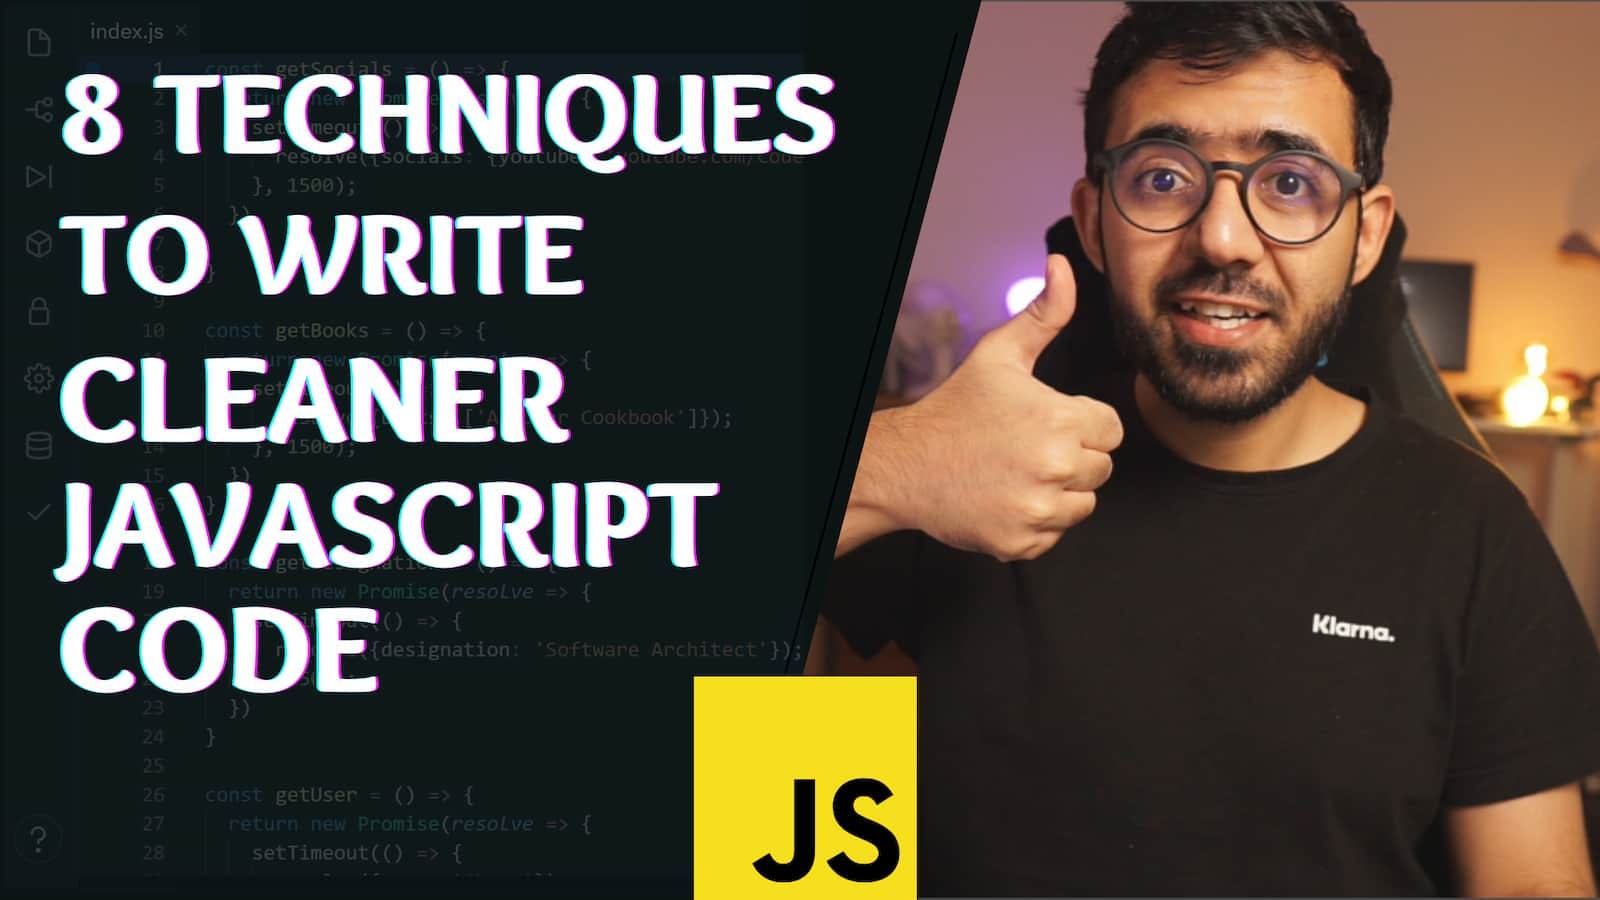 8-techniques-to-write-cleaner-javscript-code